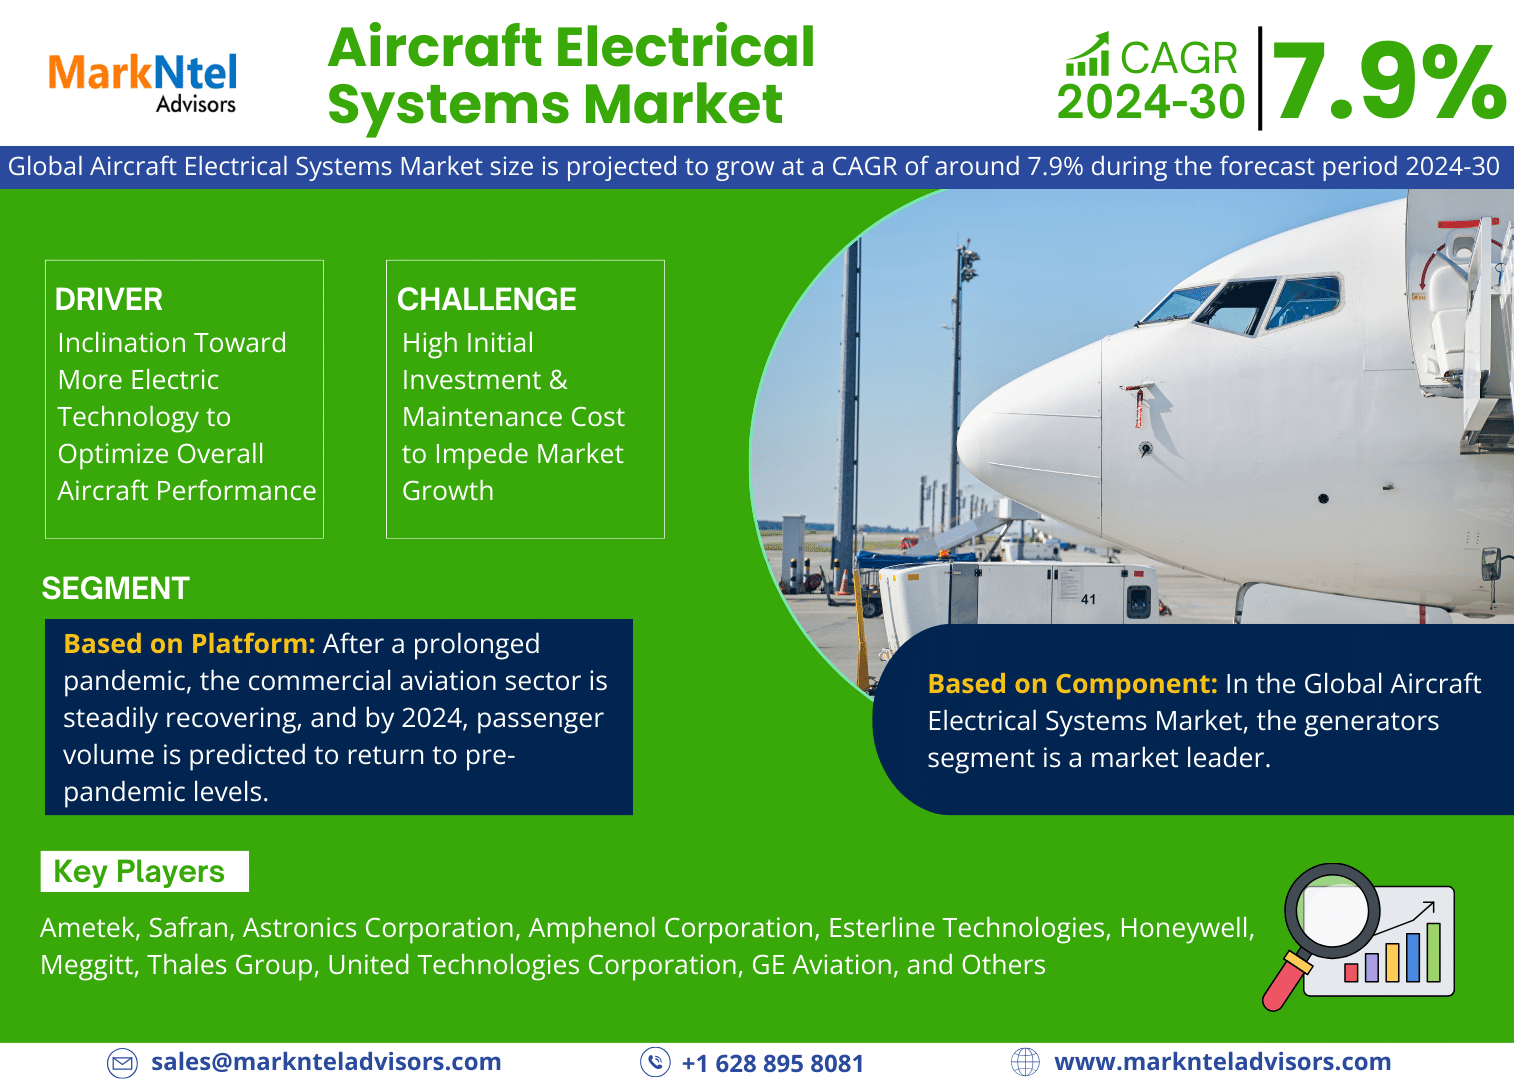 Global Aircraft Electrical Systems Market